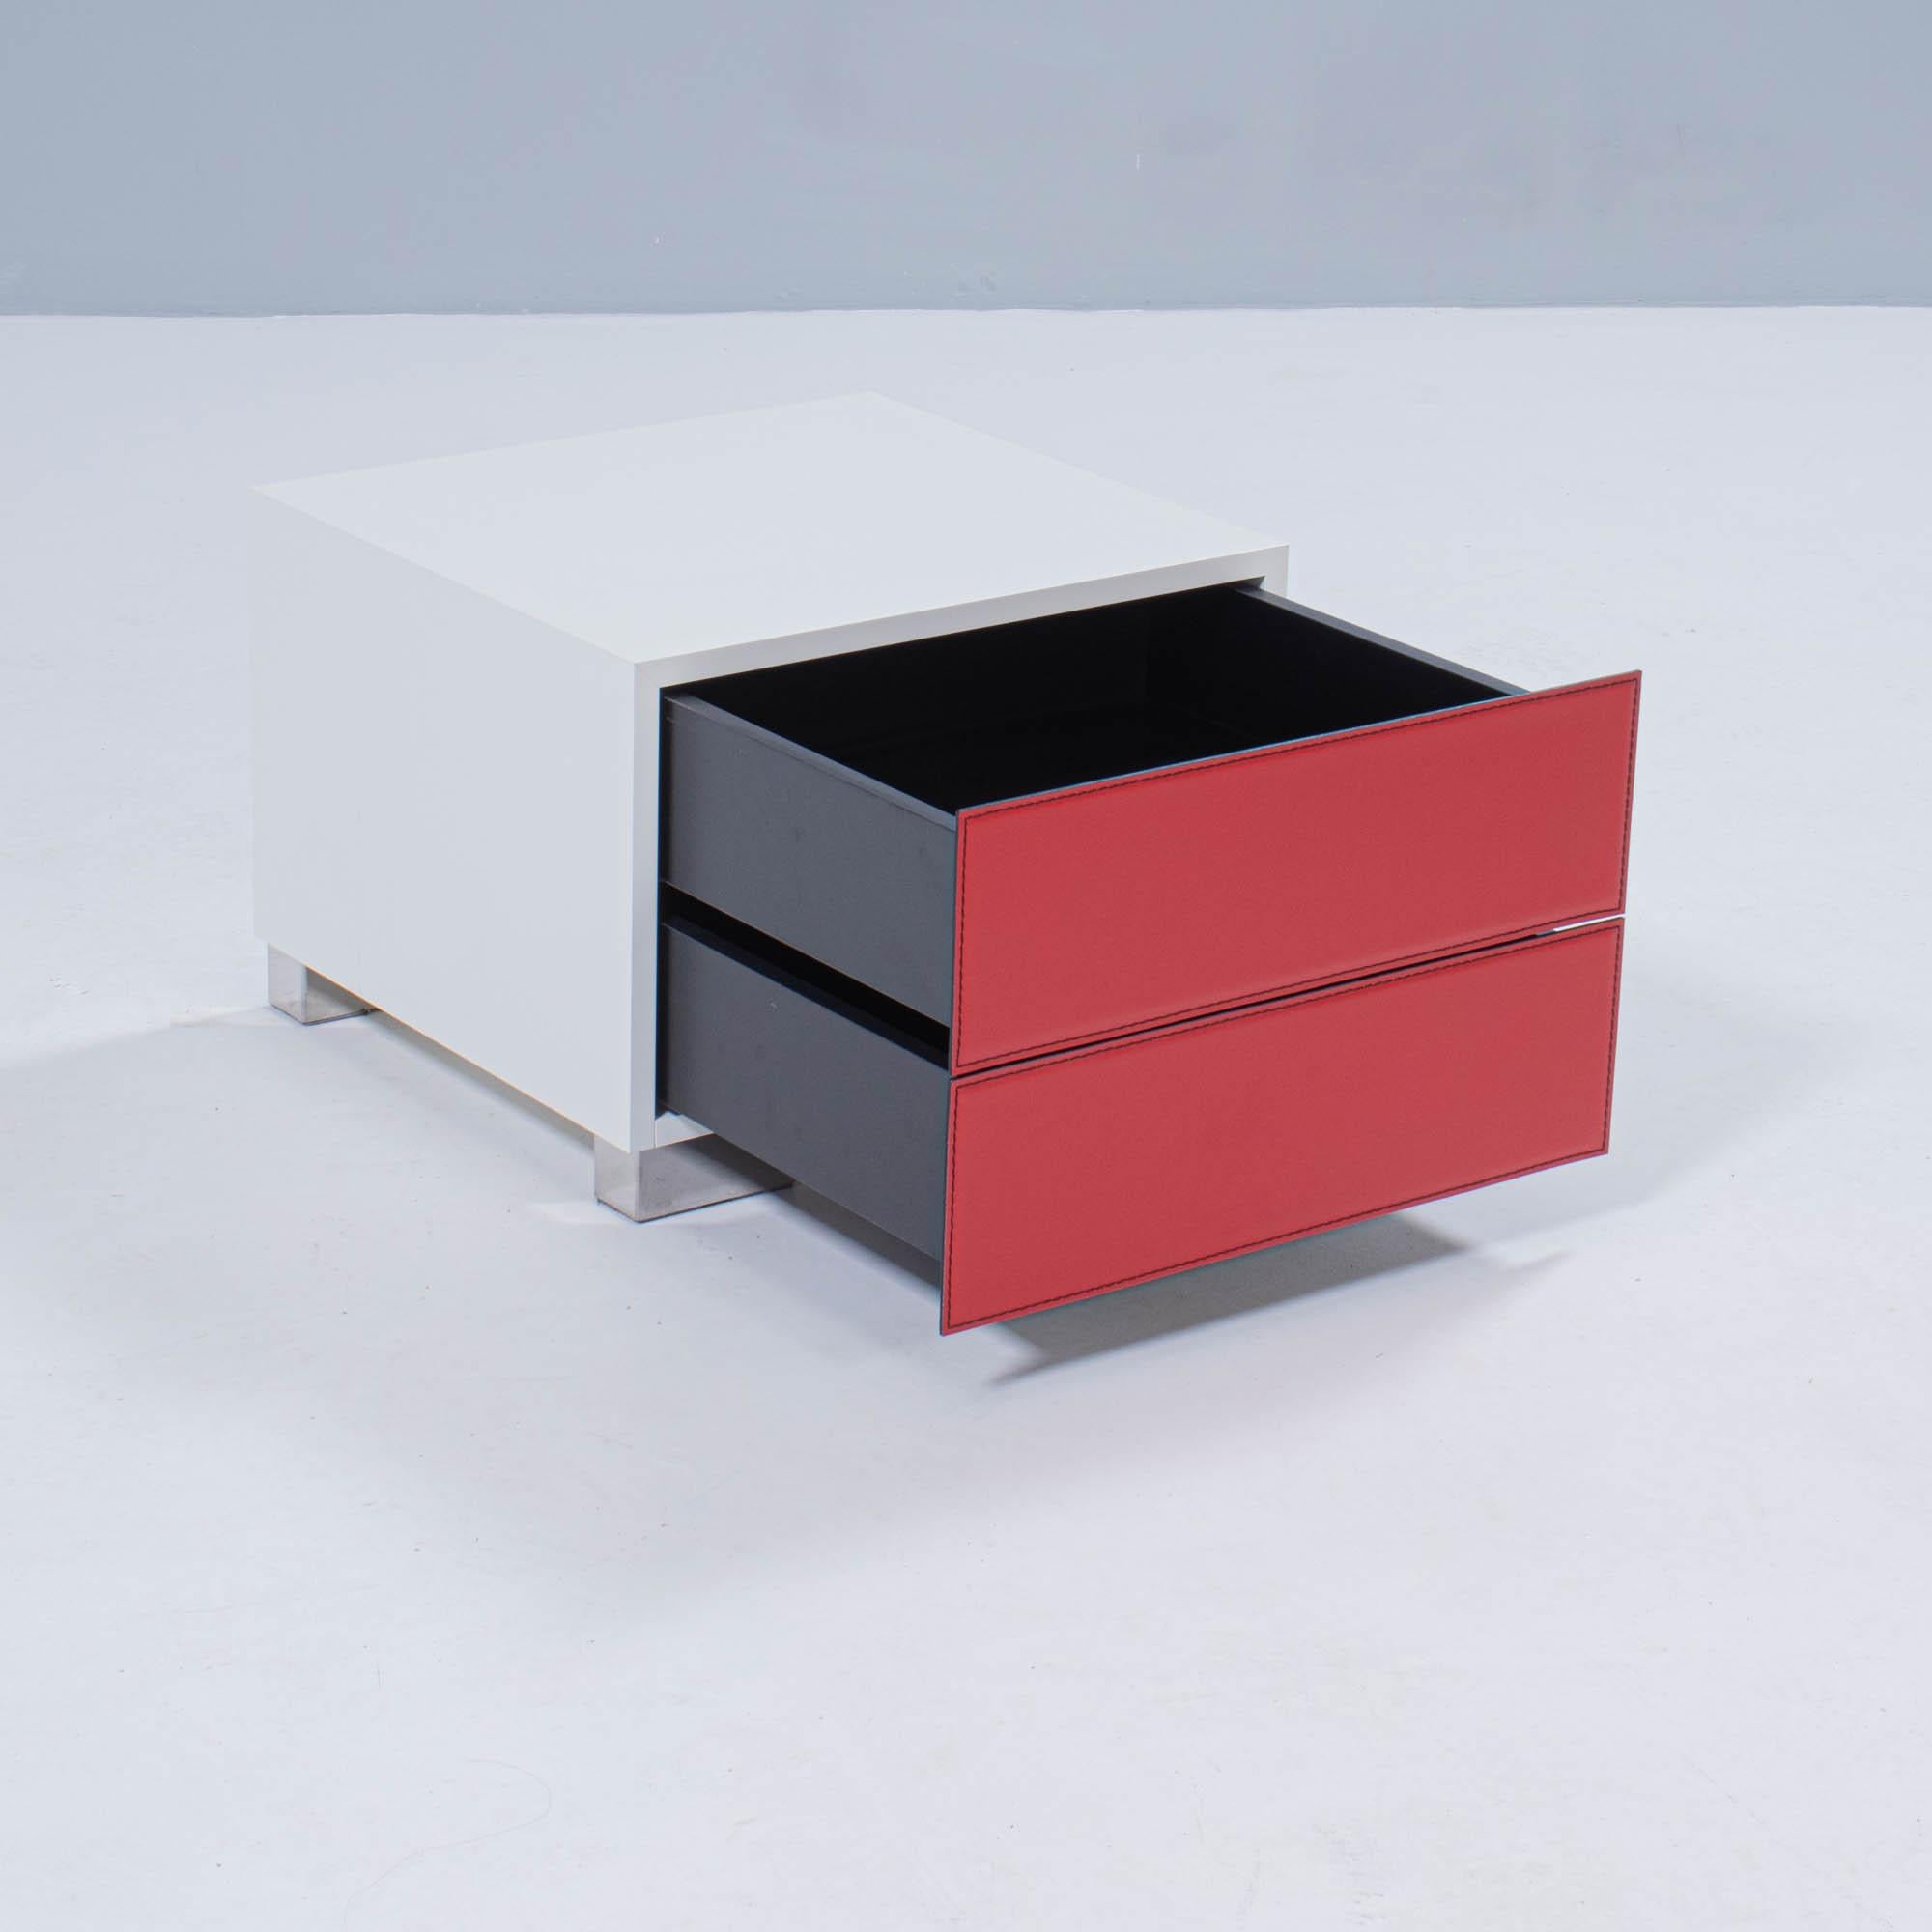 Designed by Paolo Cattelan in 2004, the Dandy bedside table is a sleek contemporary design.

Constructed from white lacquered wood, the bedside table features two drawers with red leather fronts finished with seam detailing.

The stainless steel